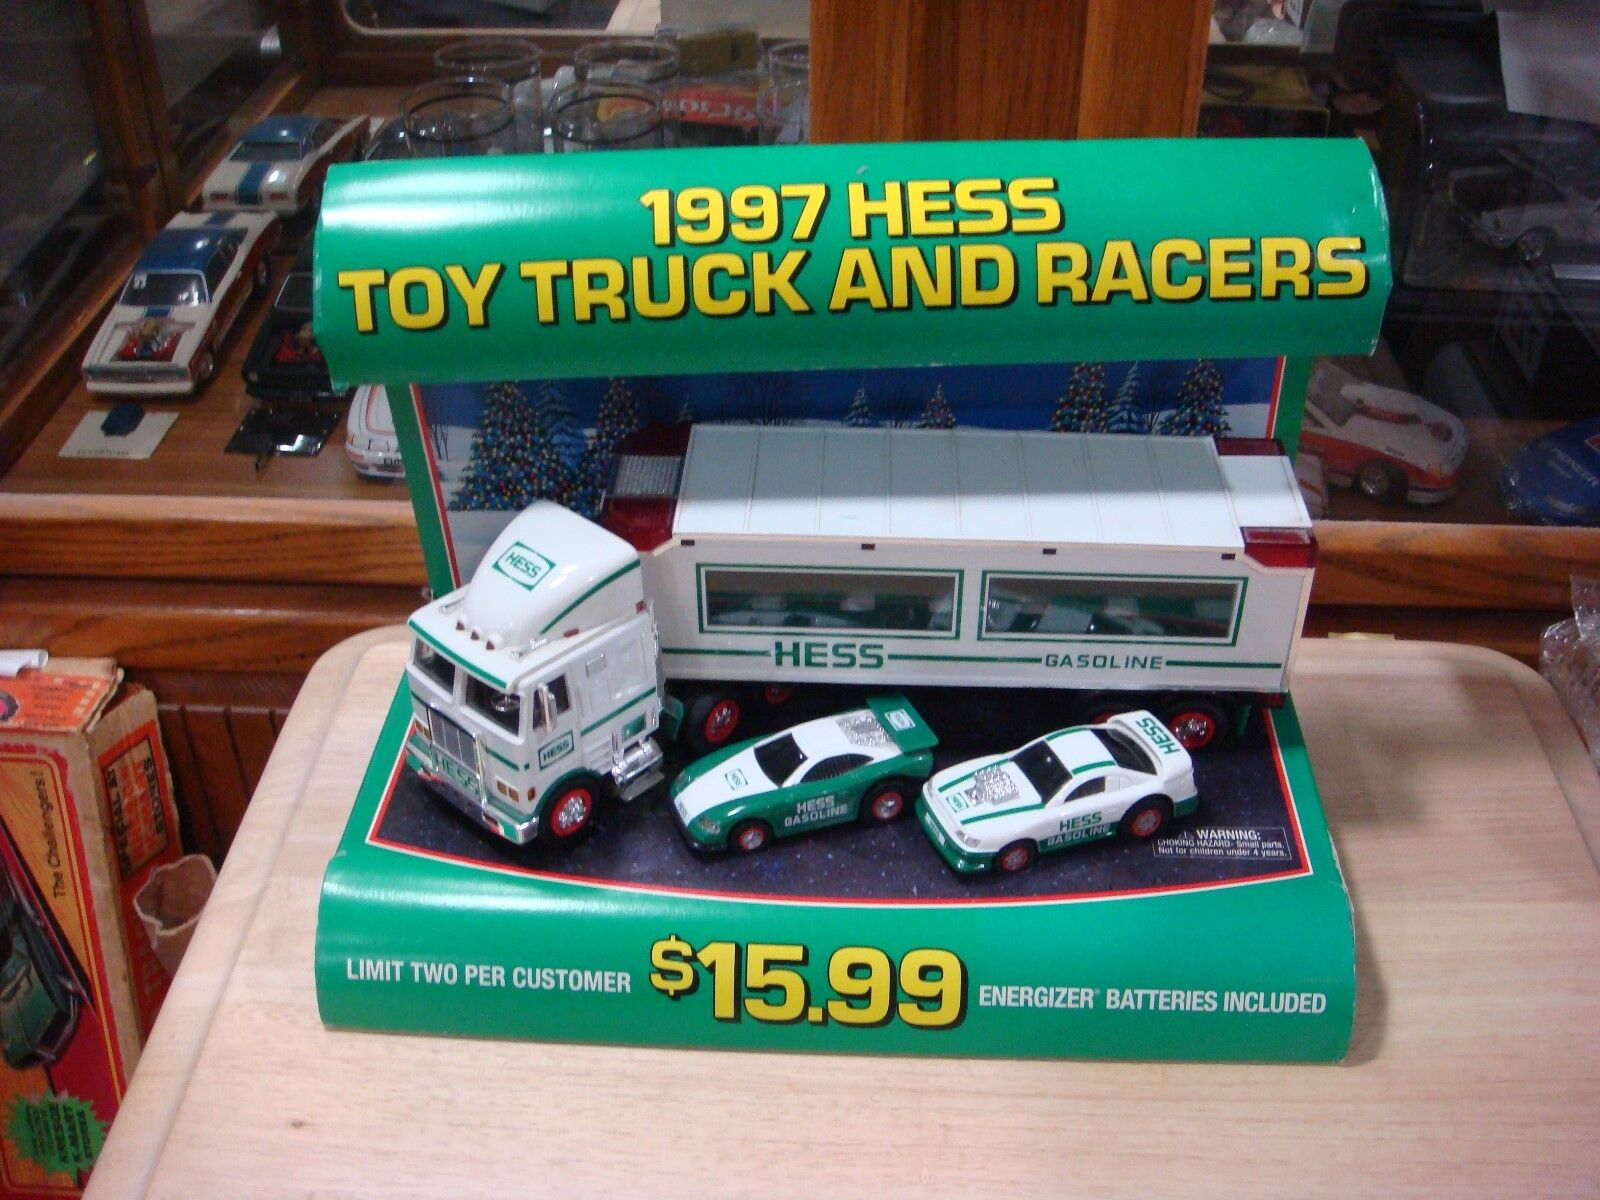  VERY RARE 1997 HESS TOY TRUCK & RACERS WITH COUNTER DISPLAY